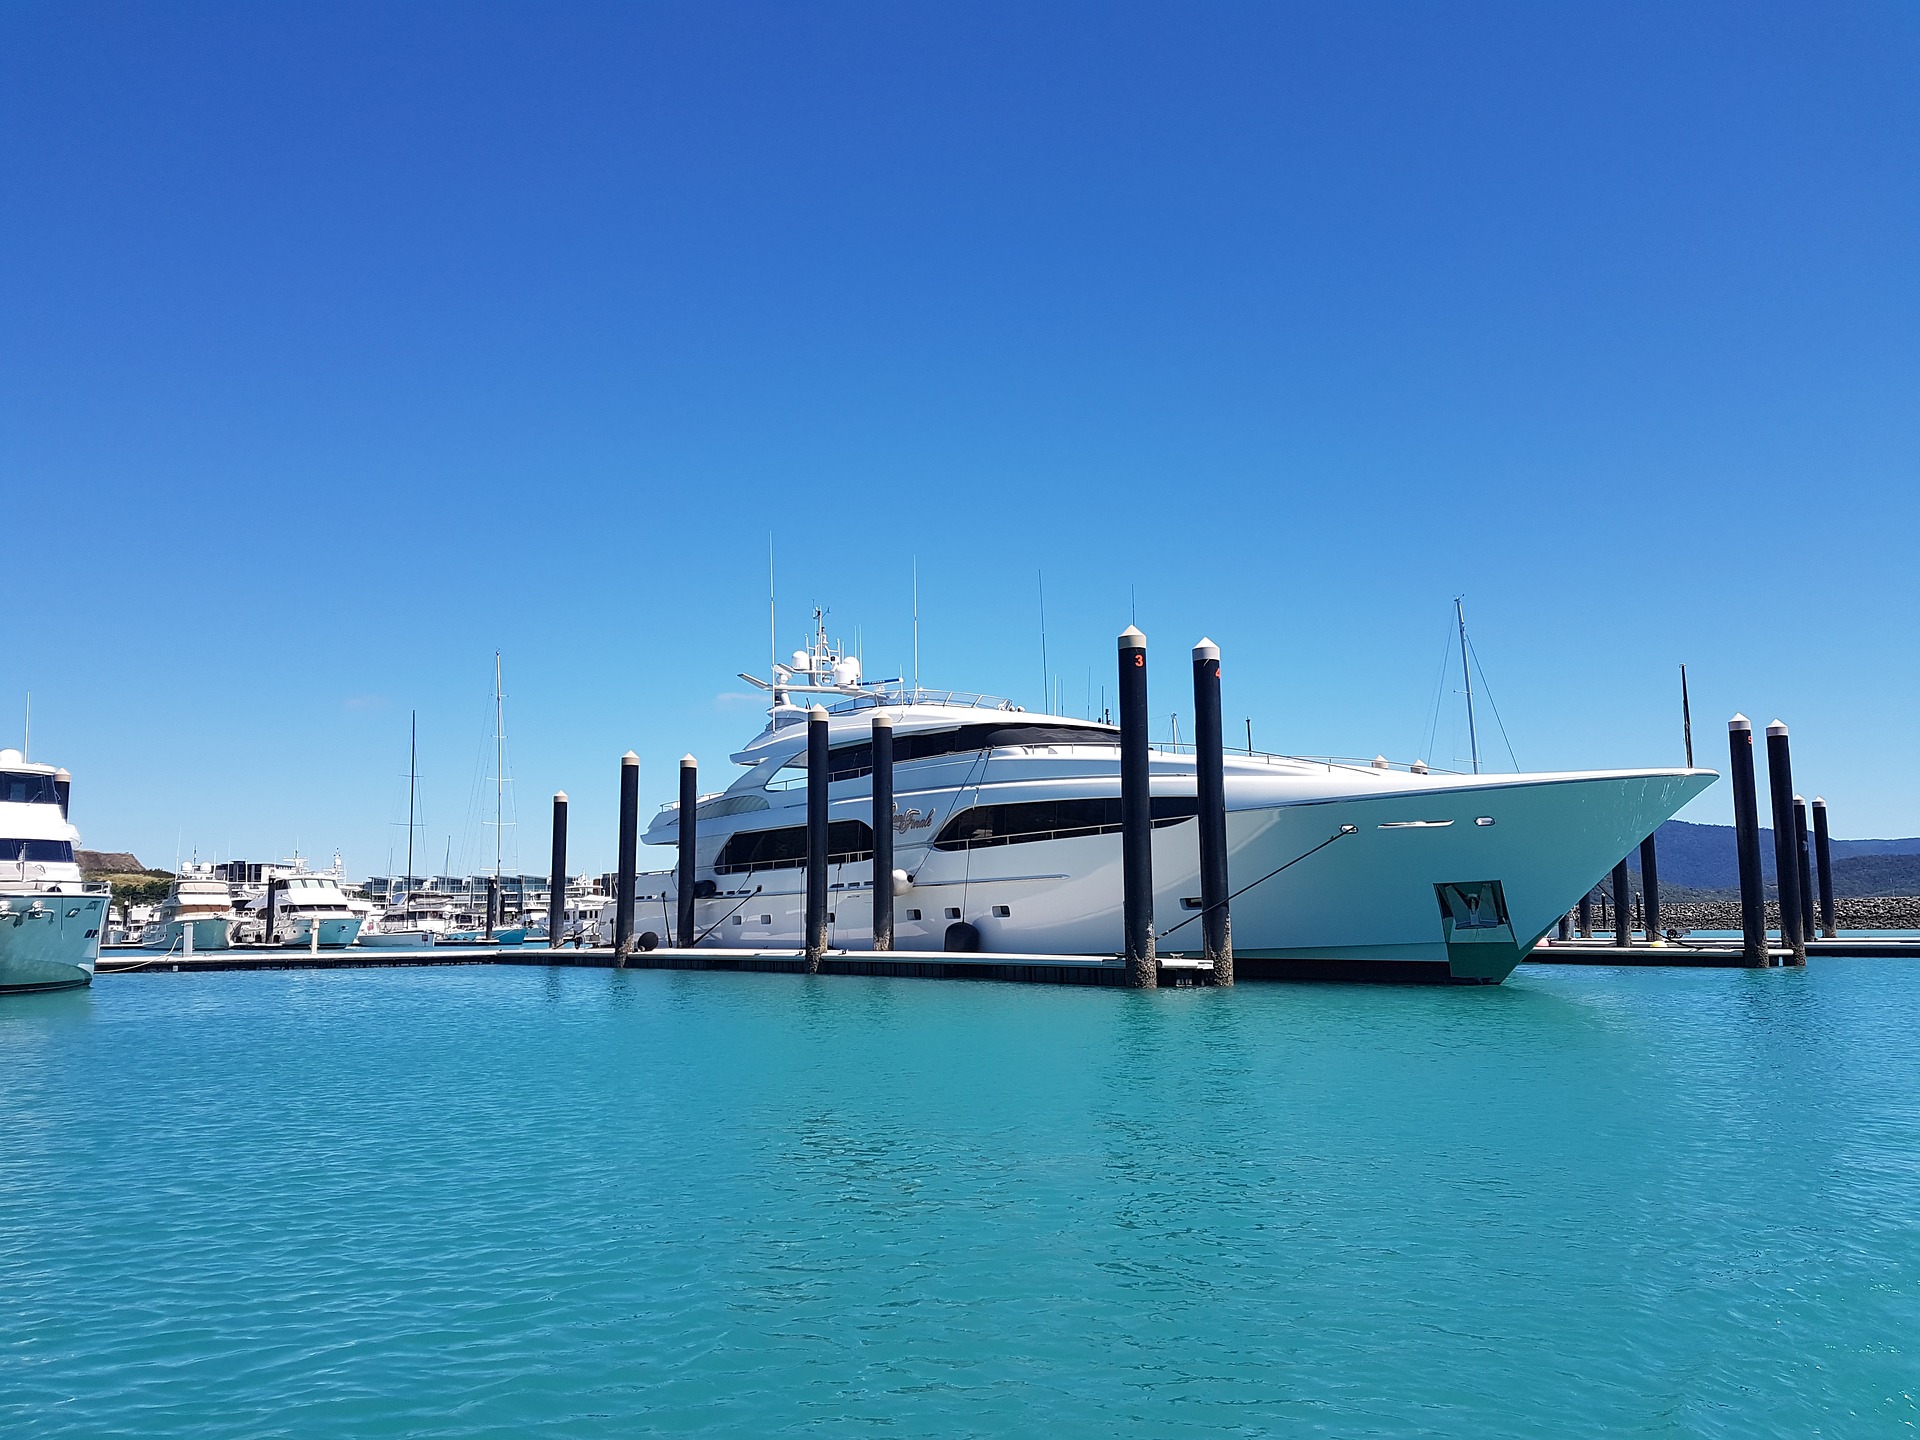  yacht expenses, yearly yacht expenses, how much does a yacht cost